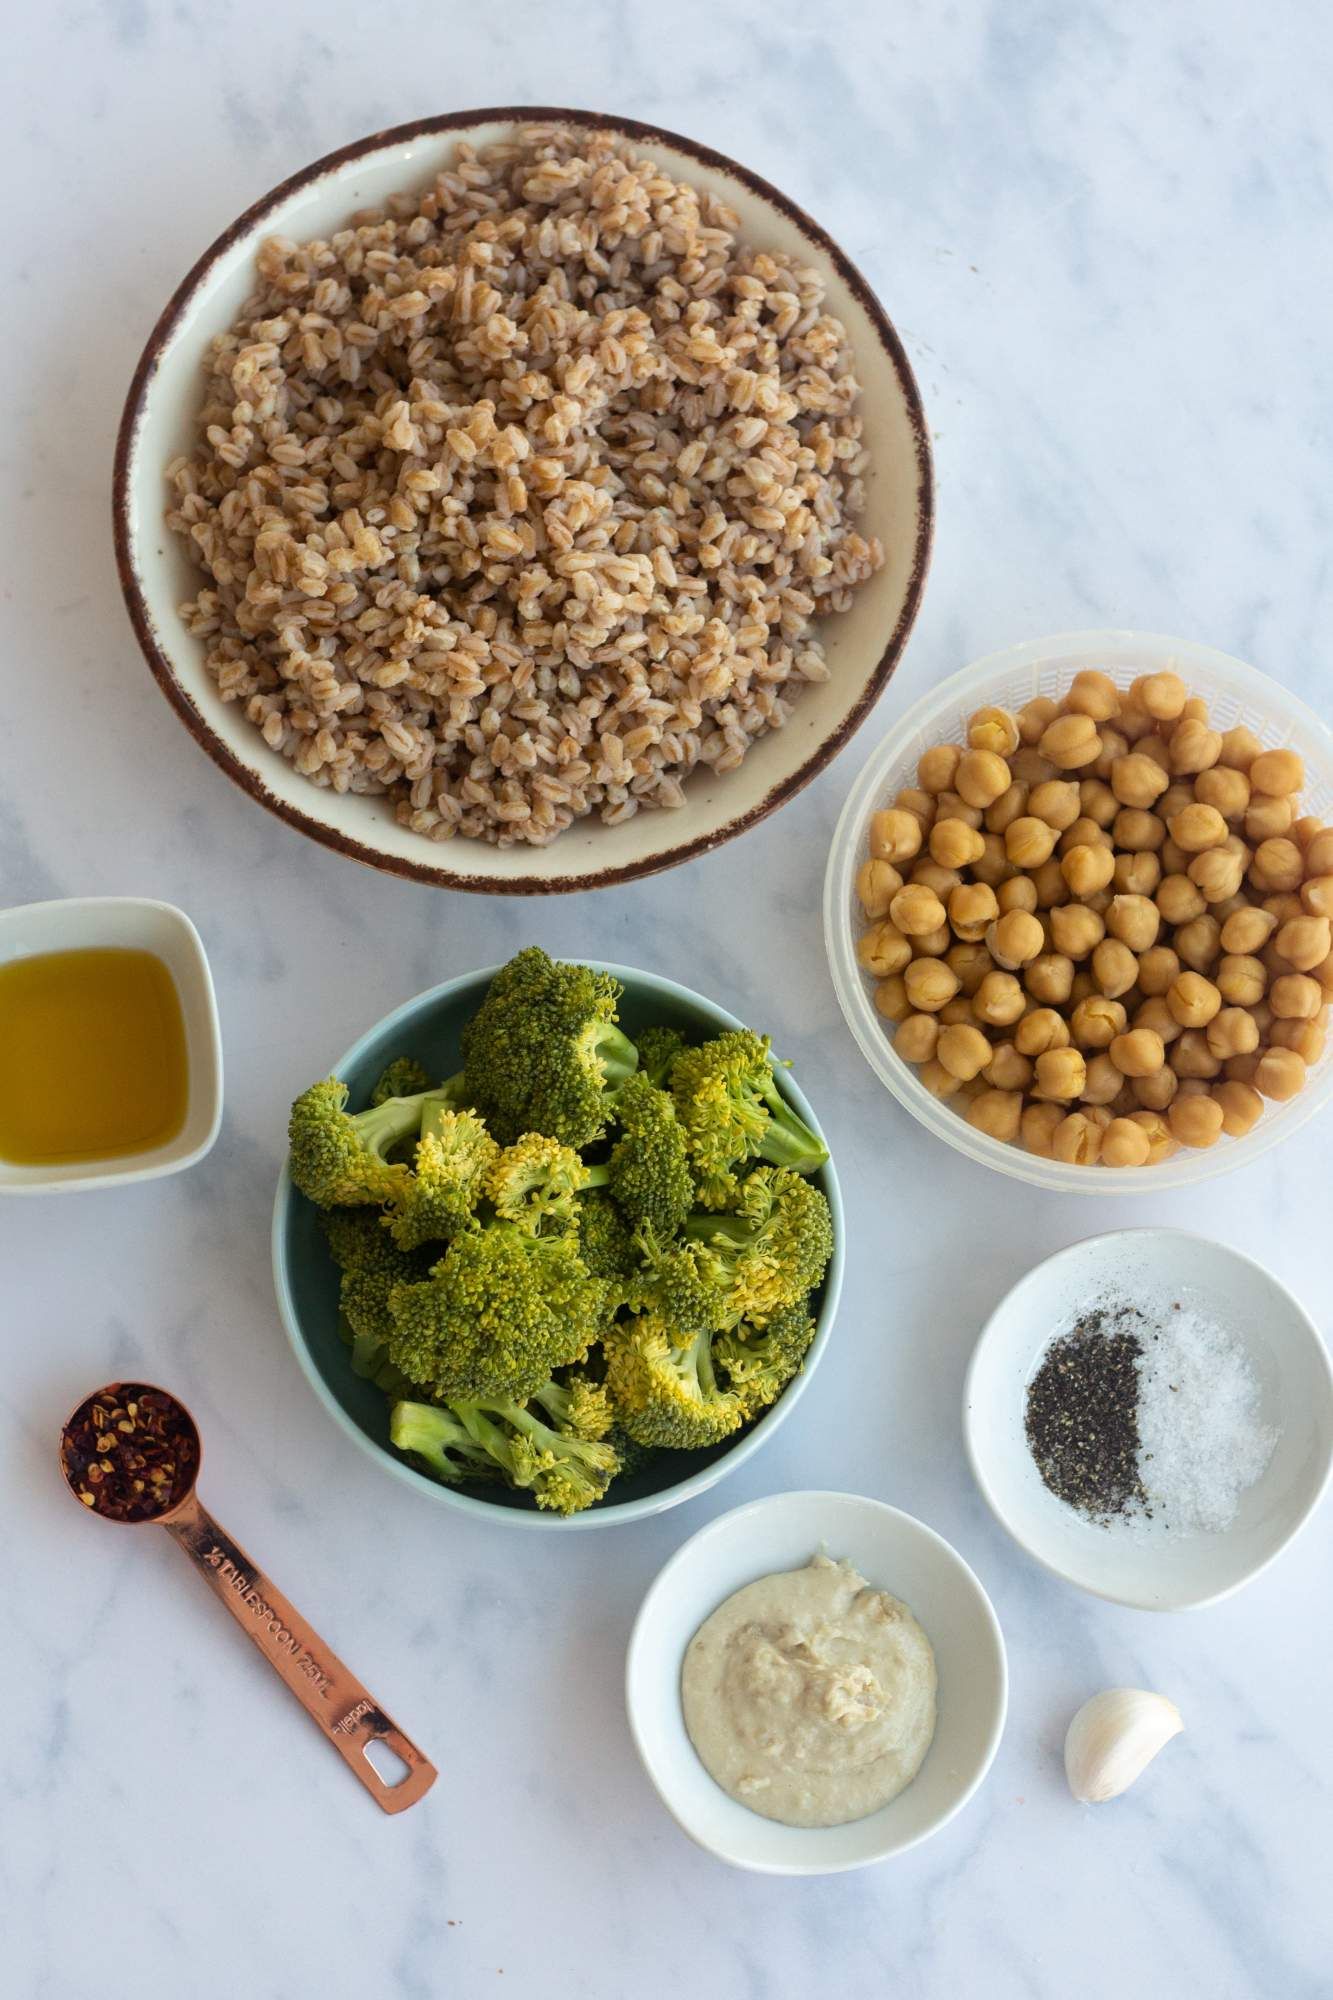 Ingredients for Farro Bowls including cooked farro, broccoli, chickpeas, tahini, and fresh herbs.